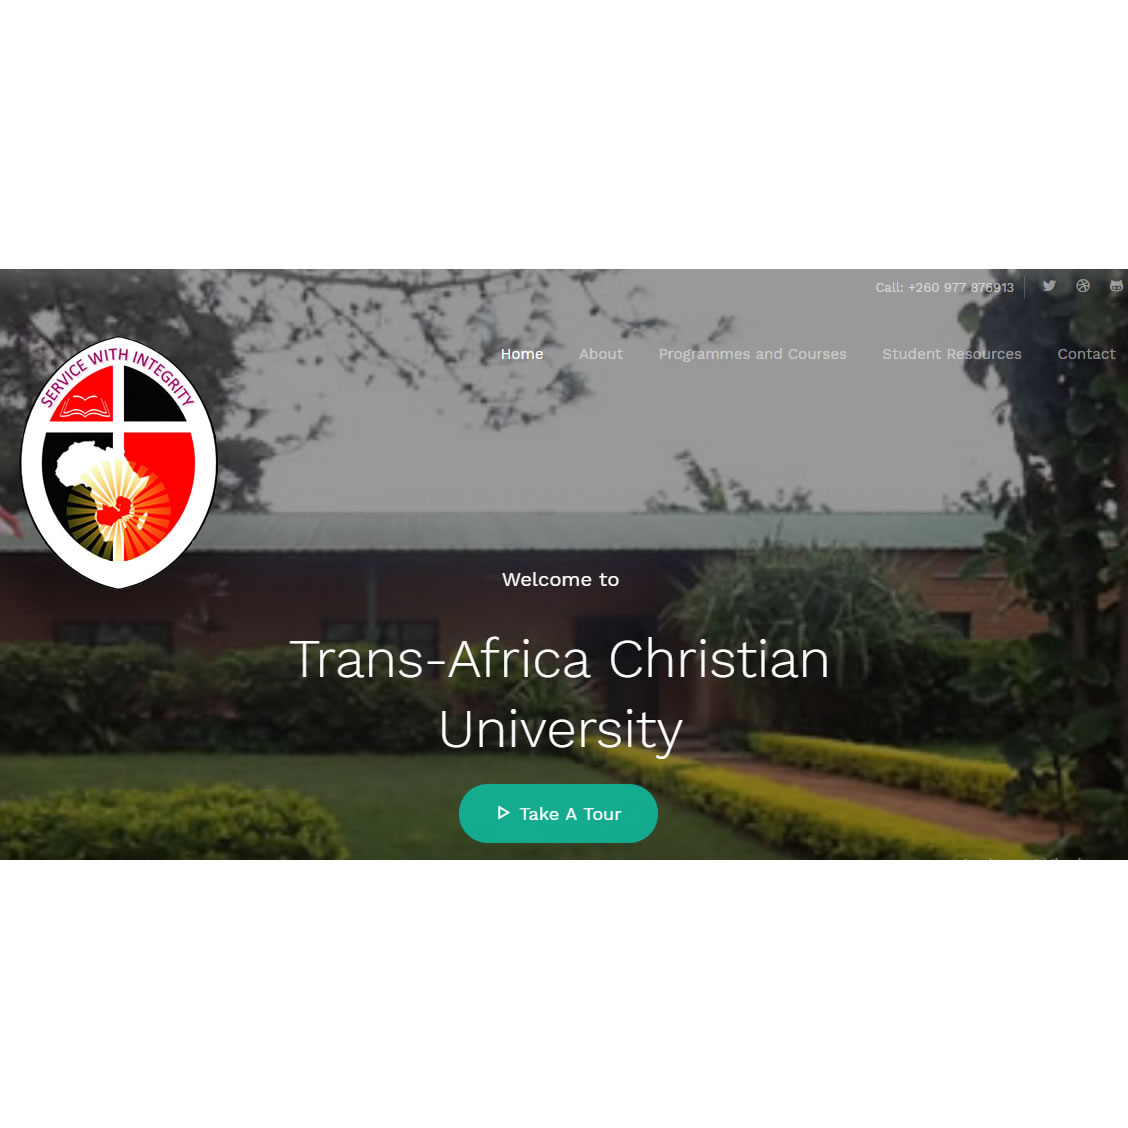 Website development and hosting, and domain administration for Trans-Africa Christian University, Kitwe, Zambia